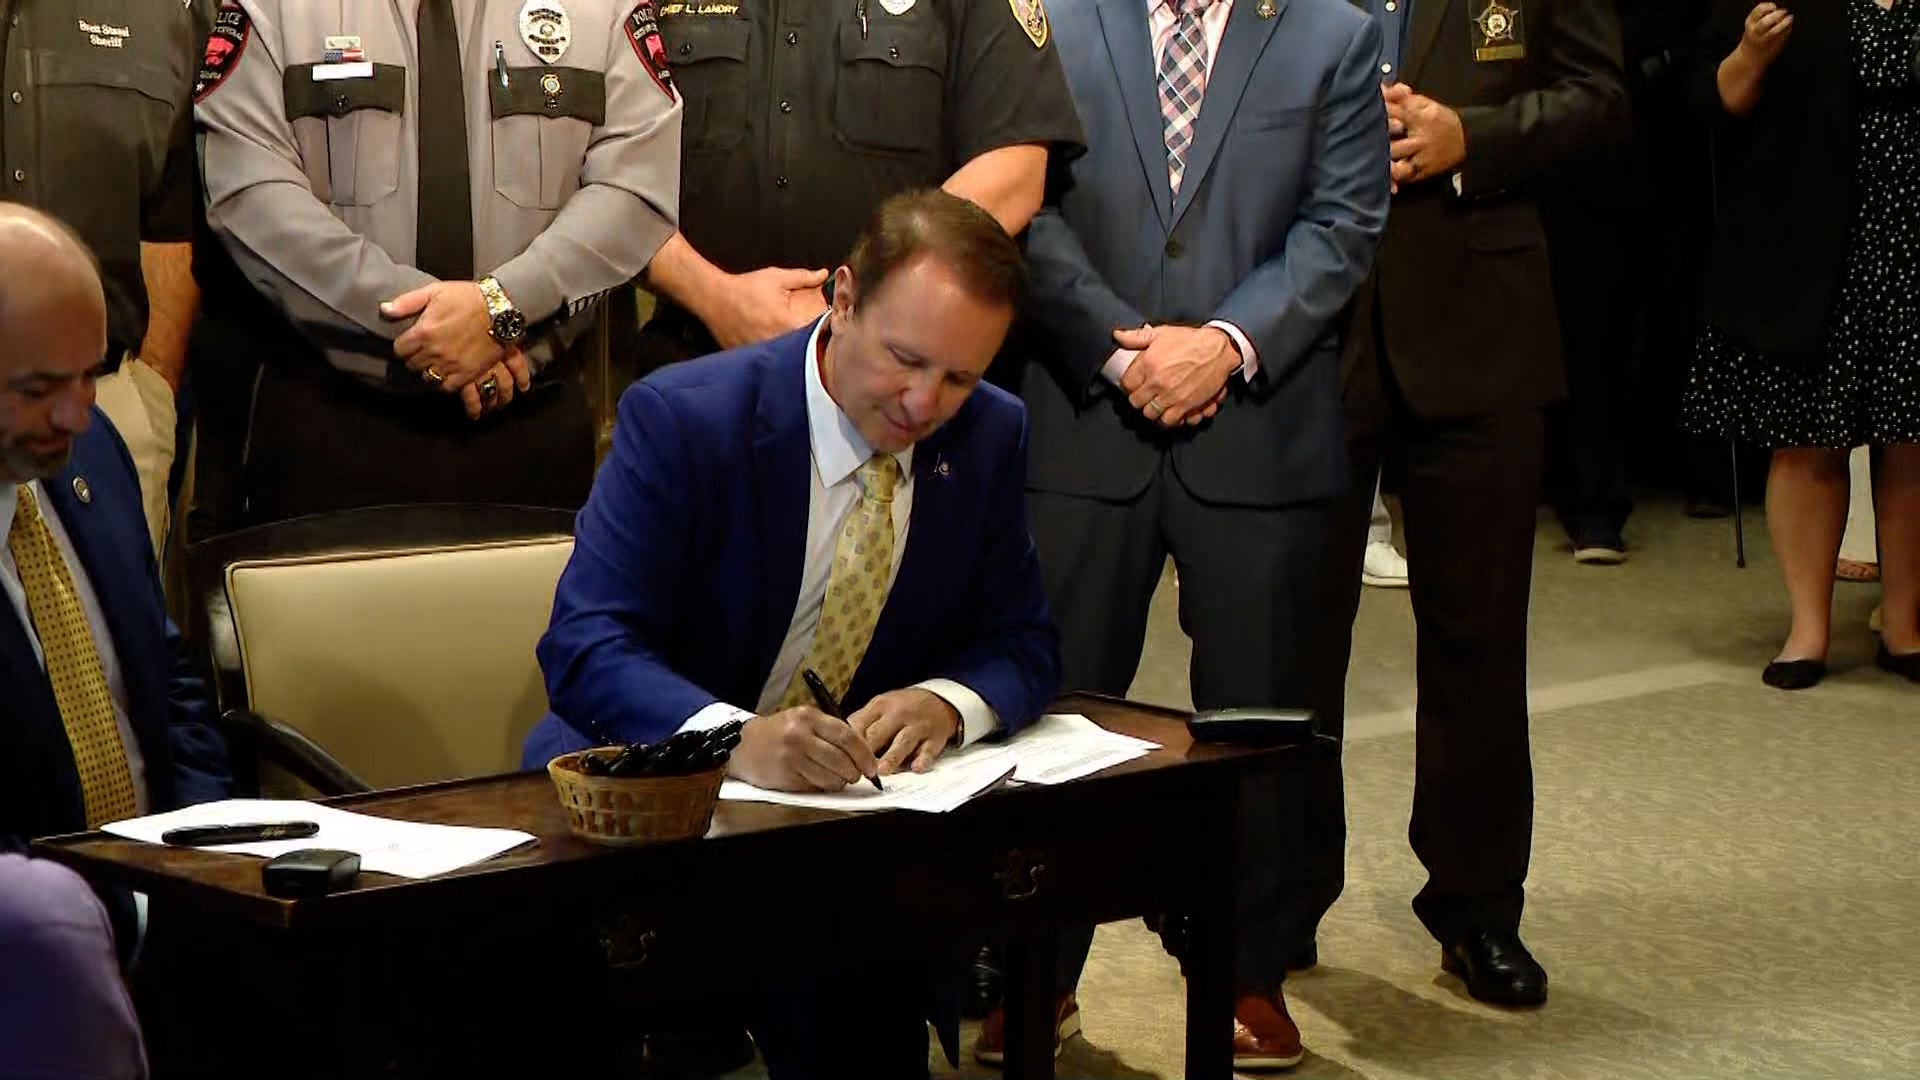 Gov. Landry signs House Bill No. 173 on Tuesday in Baton Rouge make coming within 25 feet of a police officer lawfully engaged in law enforcement duties a crime.